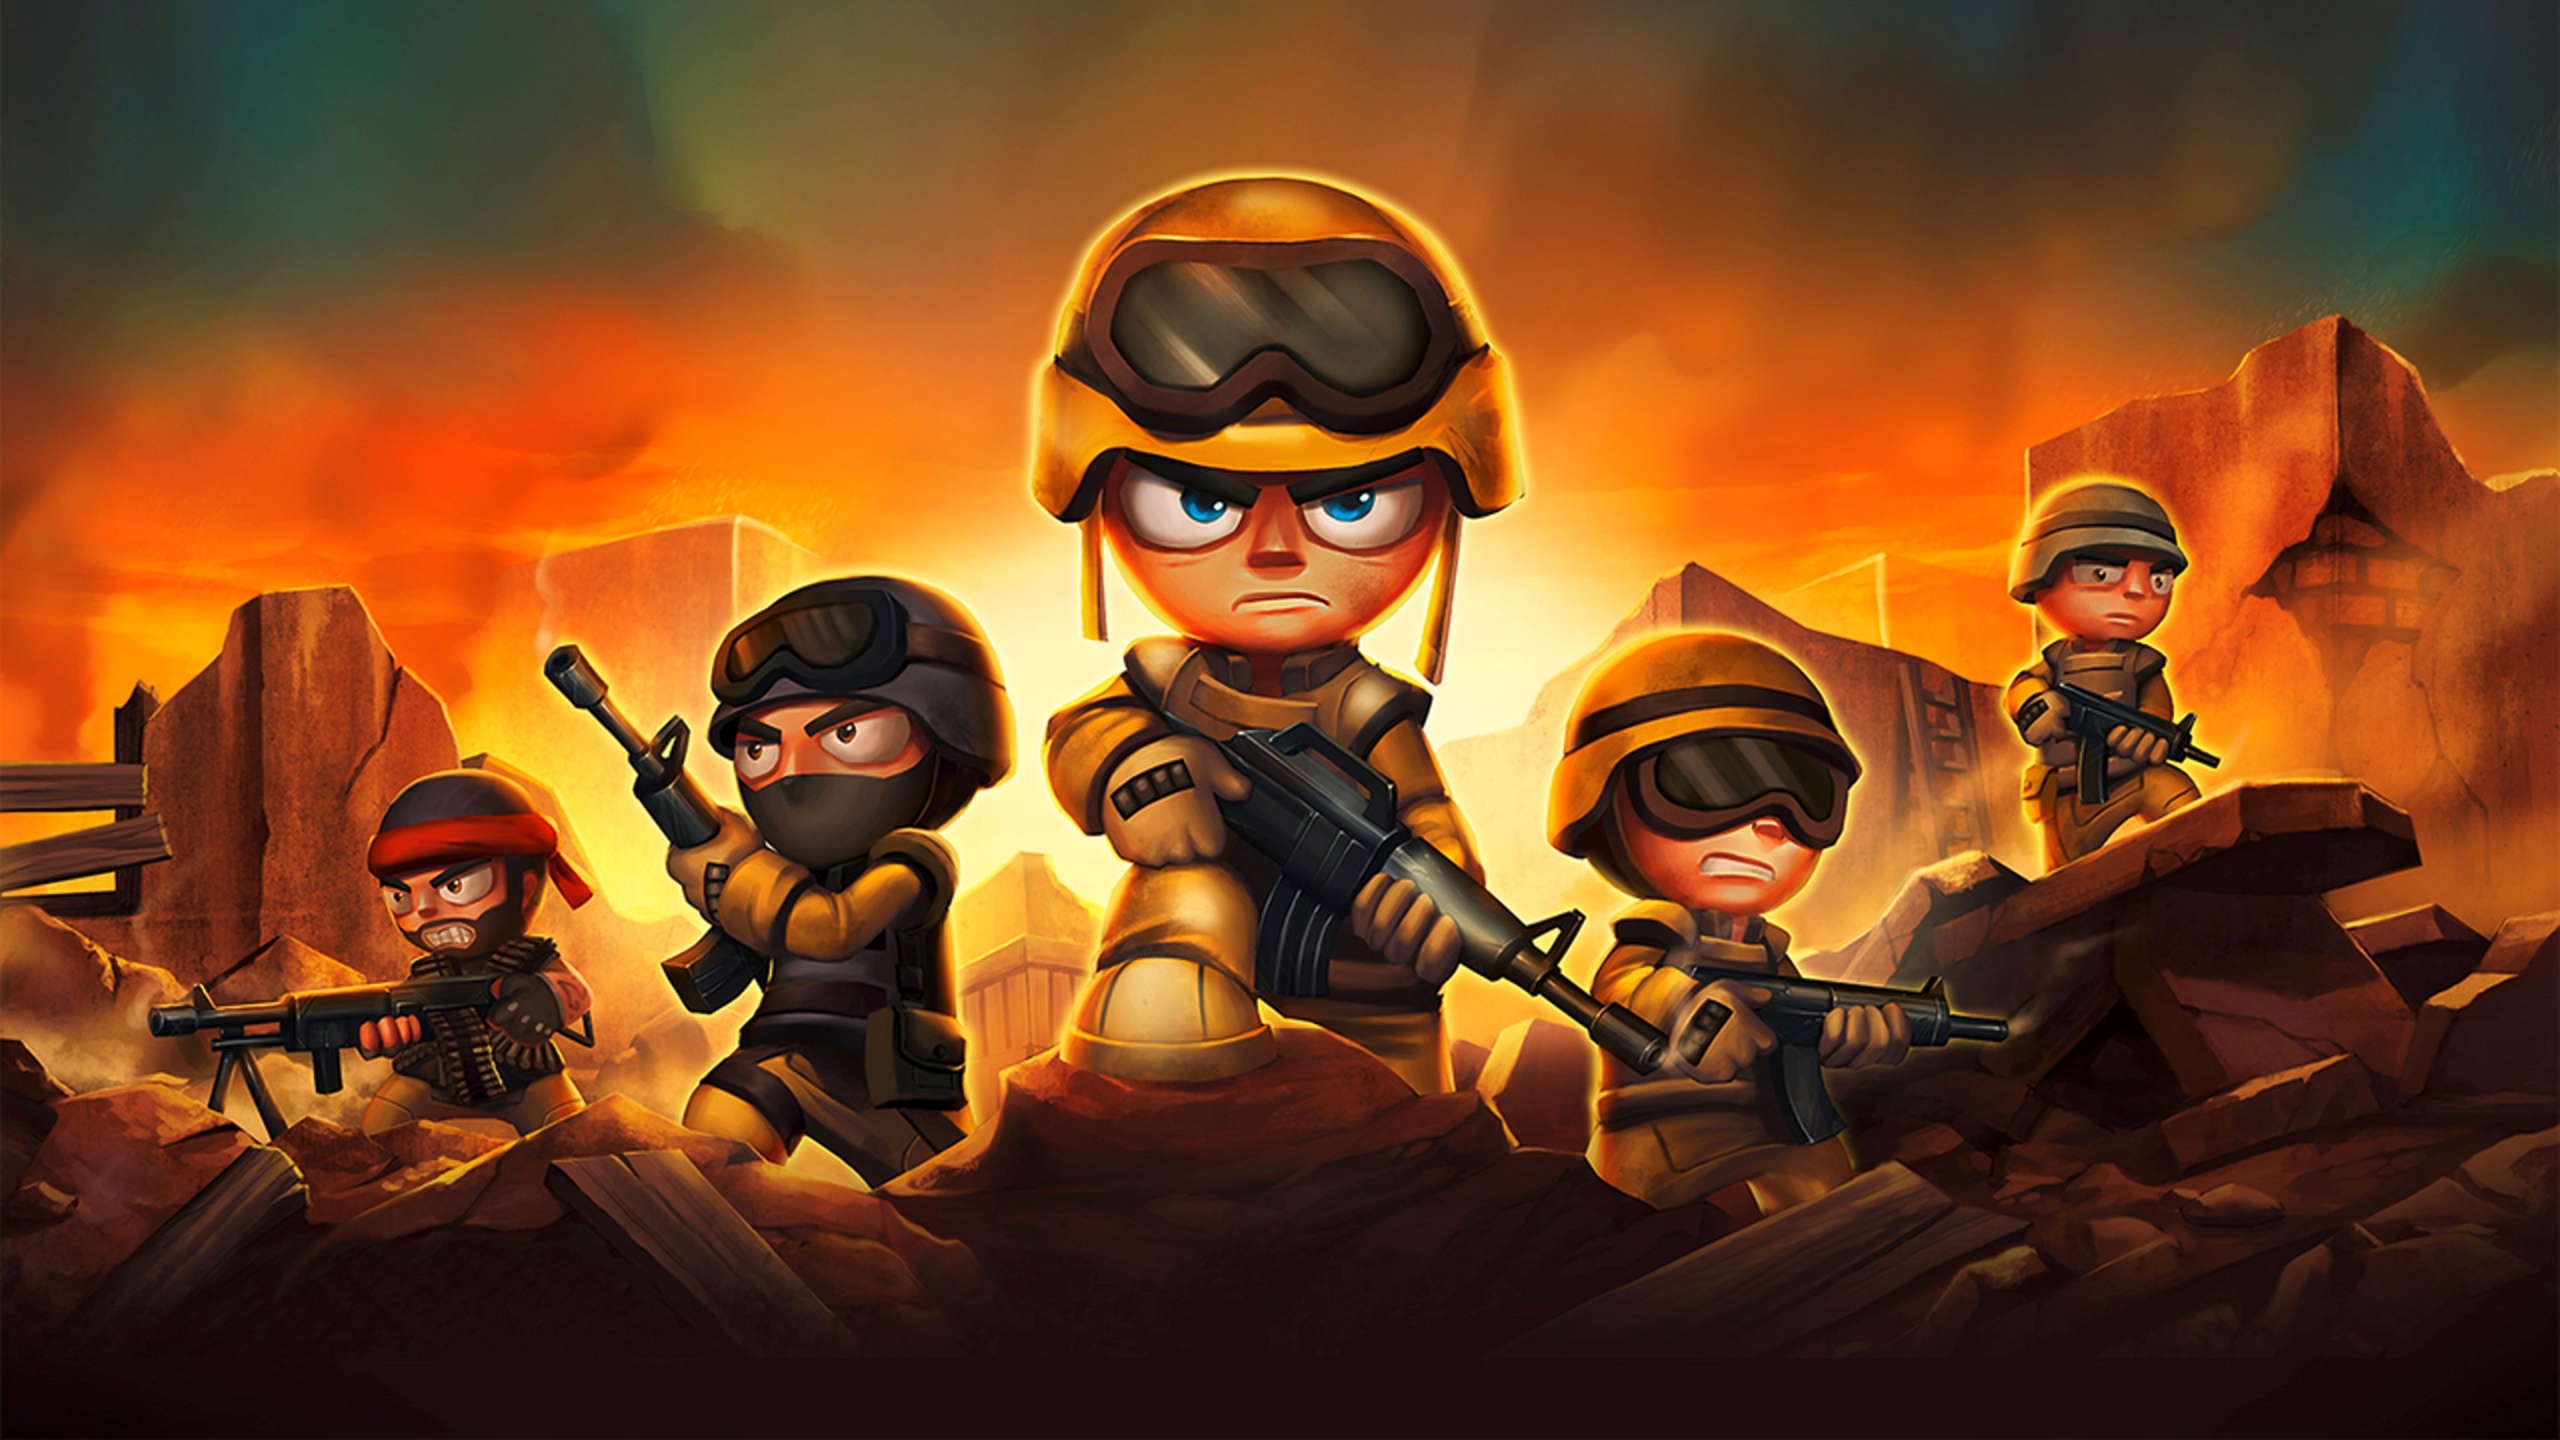 Tiny Troopers Joint Ops XL download the new version for ipod